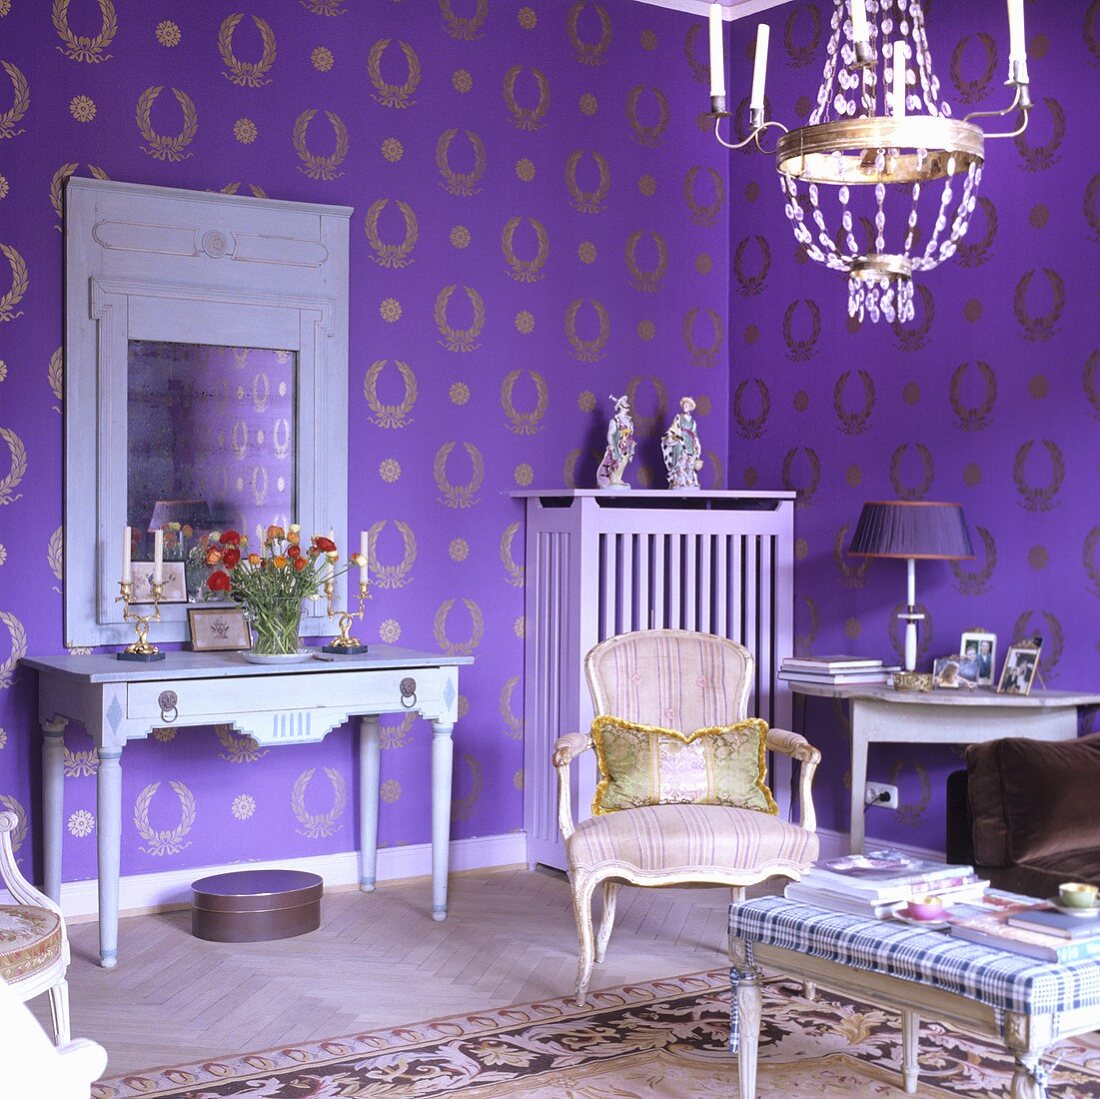 A living room with a Rococo chair and a country house-style wall table against a wall hung with purple and gold wallpaper